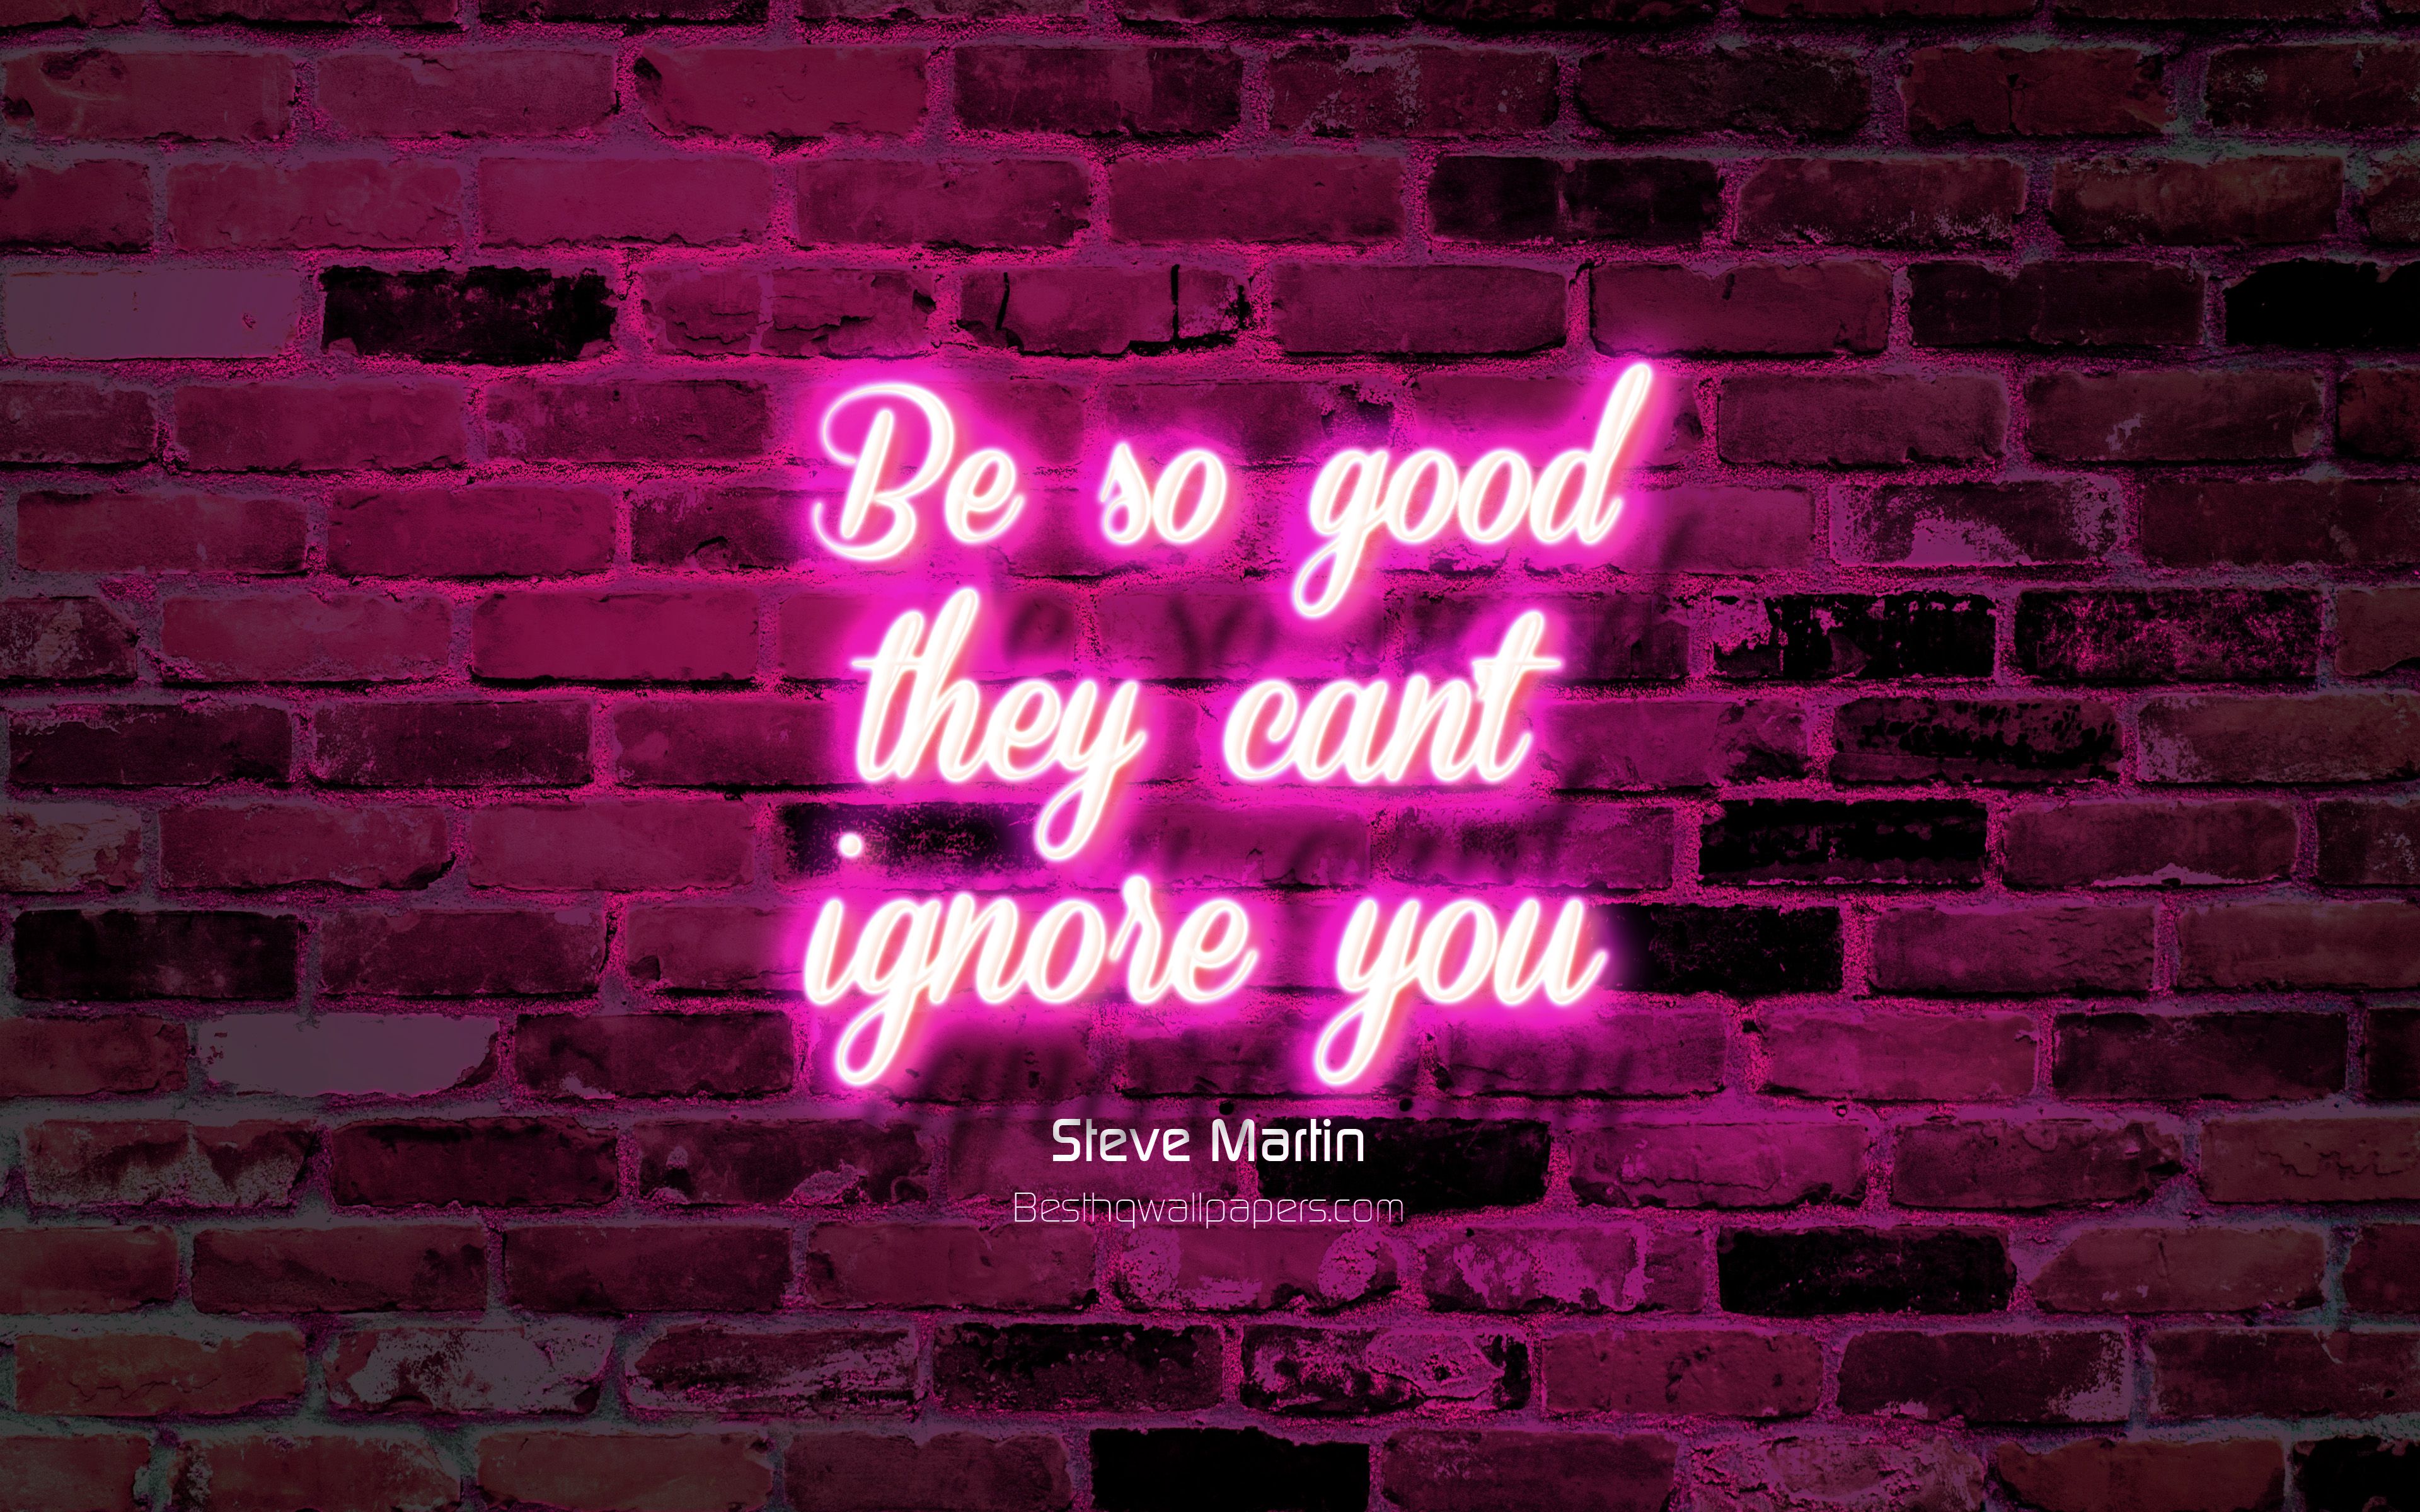 Download wallpaper Be so good they cant ignore you, purple brick